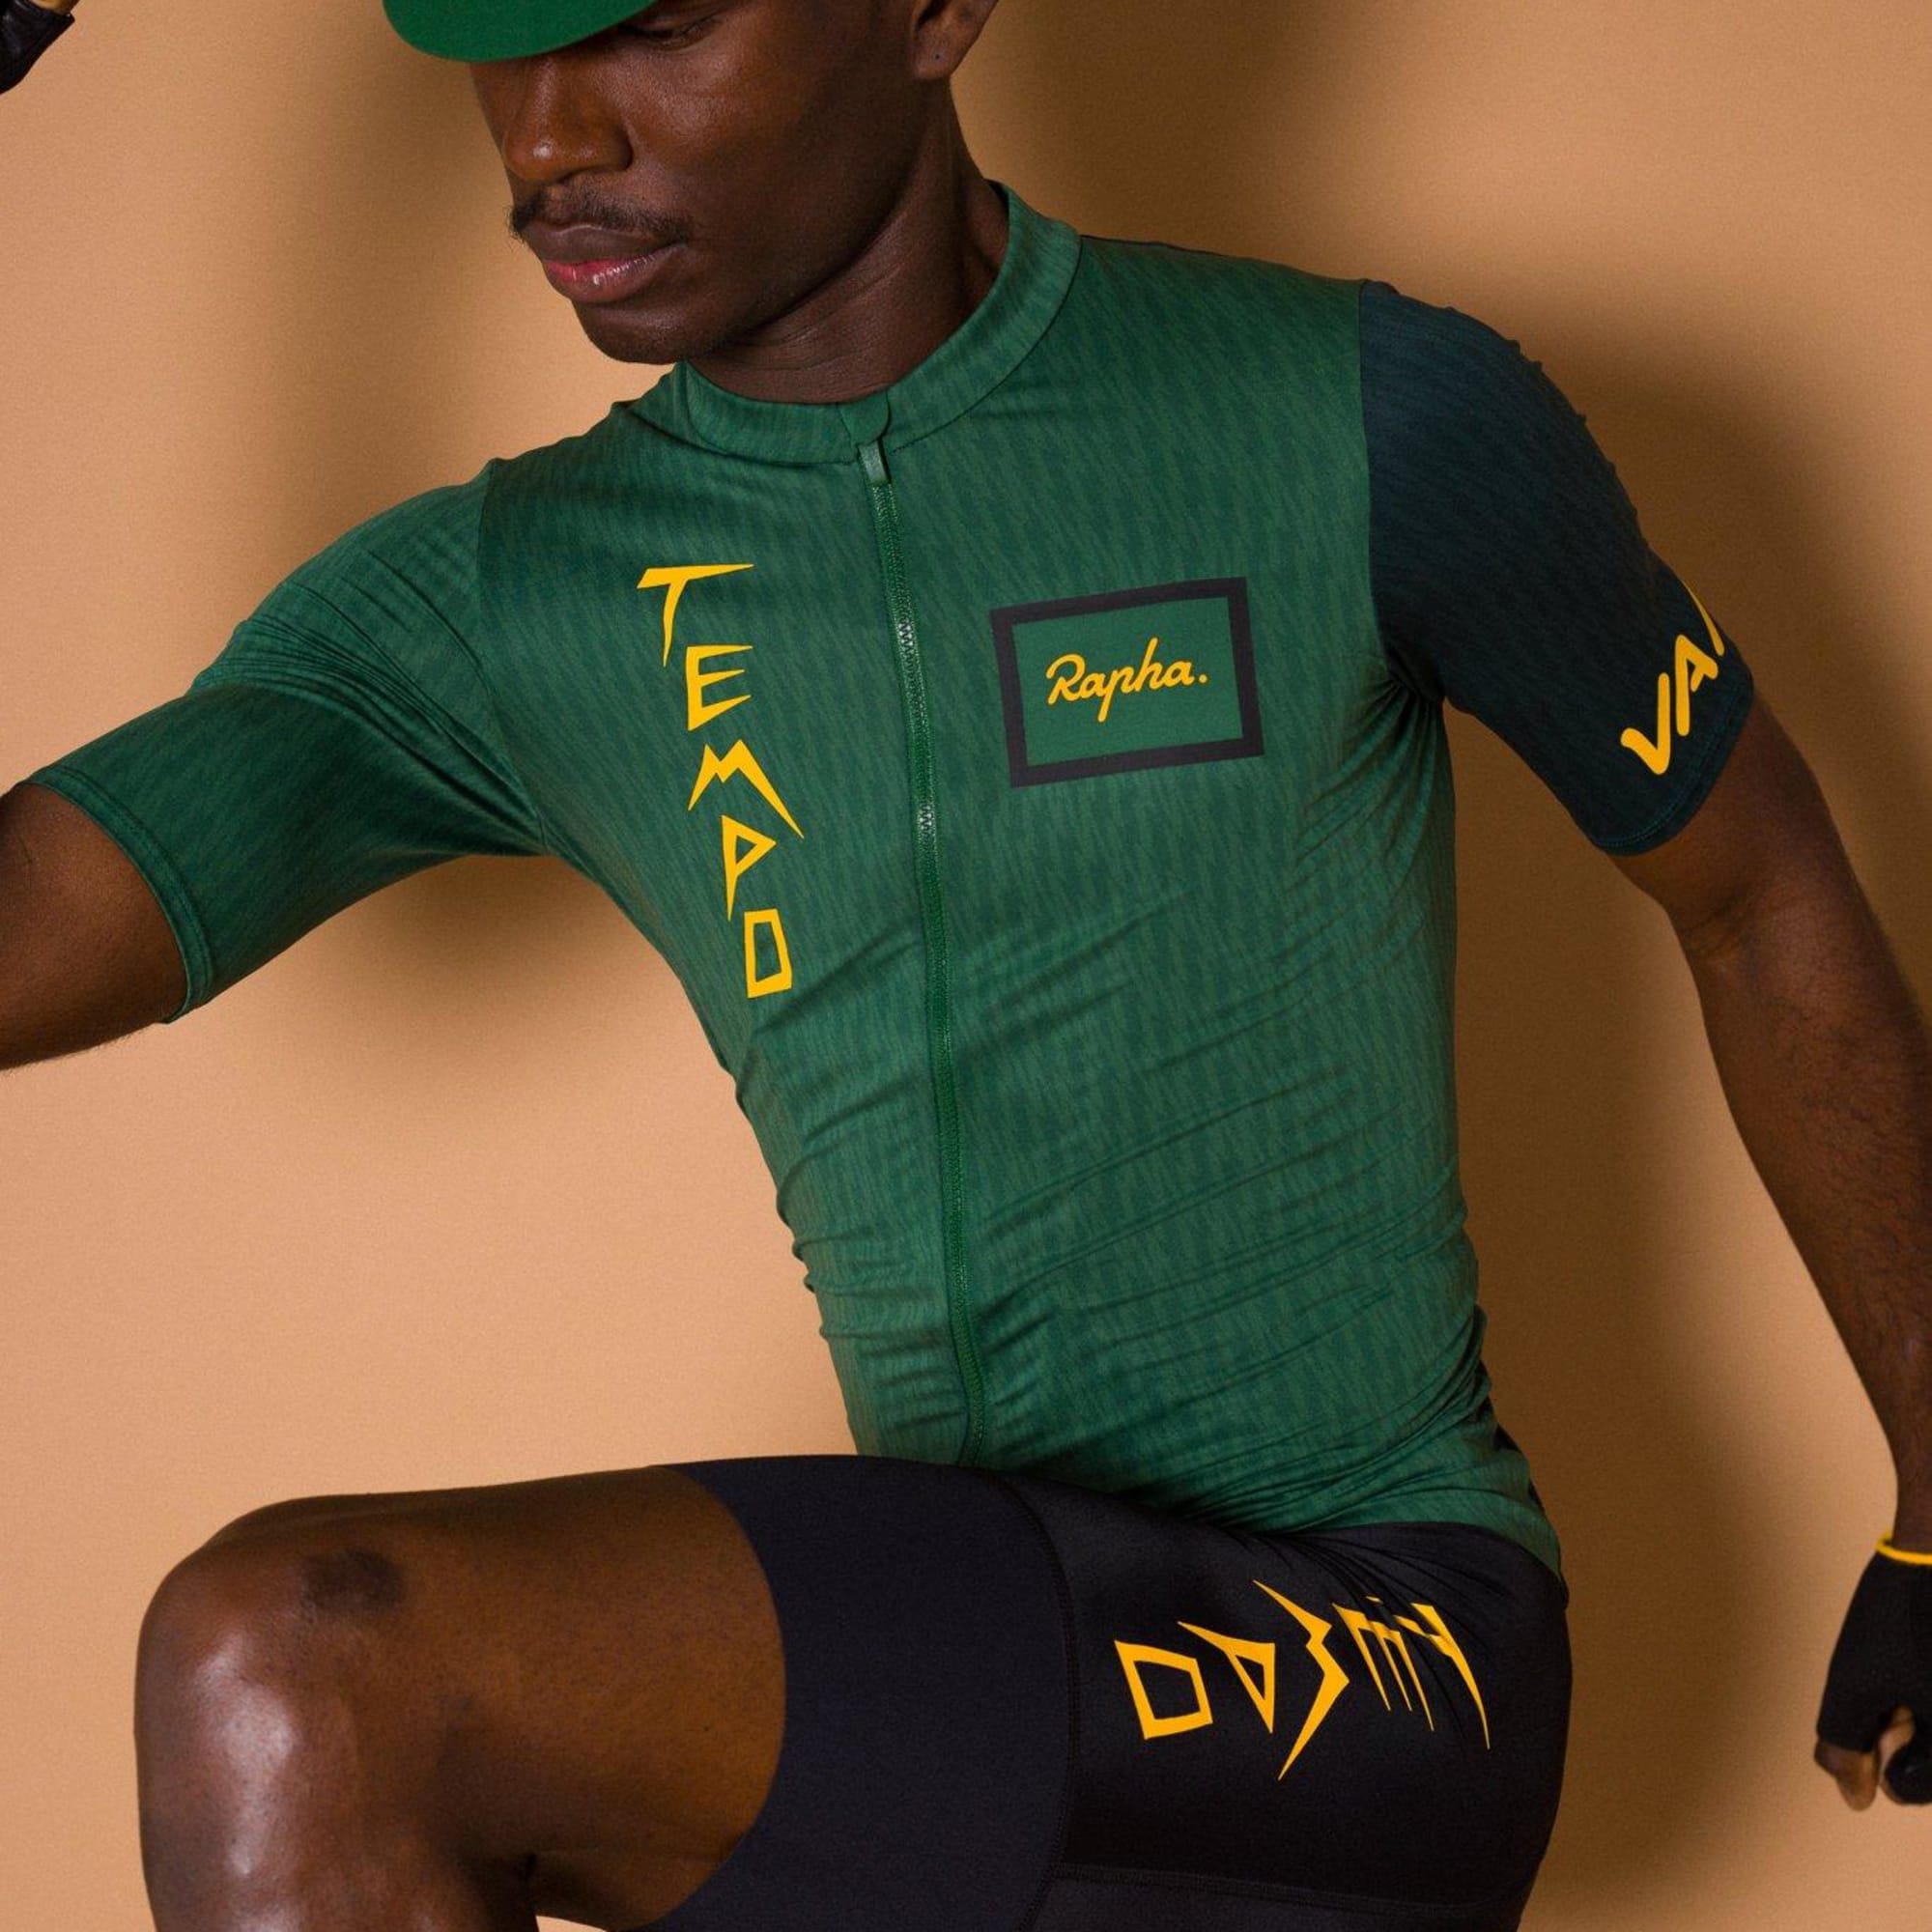 Rapha Nelson Vails Collection